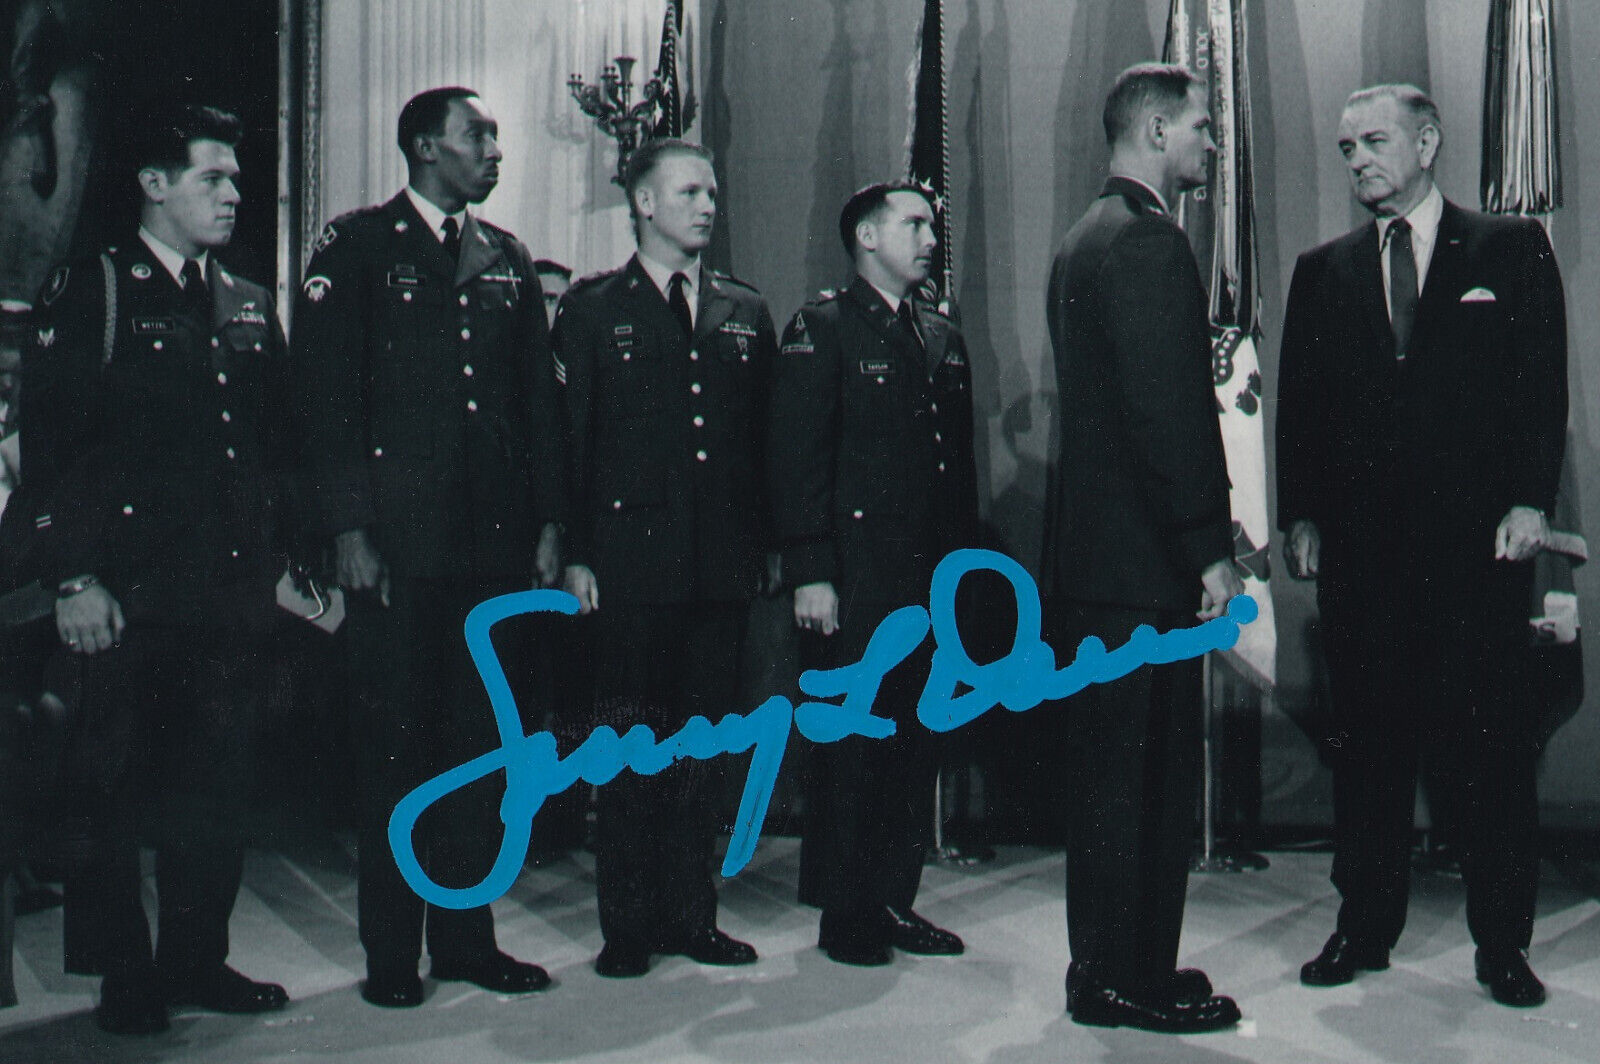 Sammy L. Davis Signed Autographed 4x6 Photo Medal of Honor Vietnam War US Army